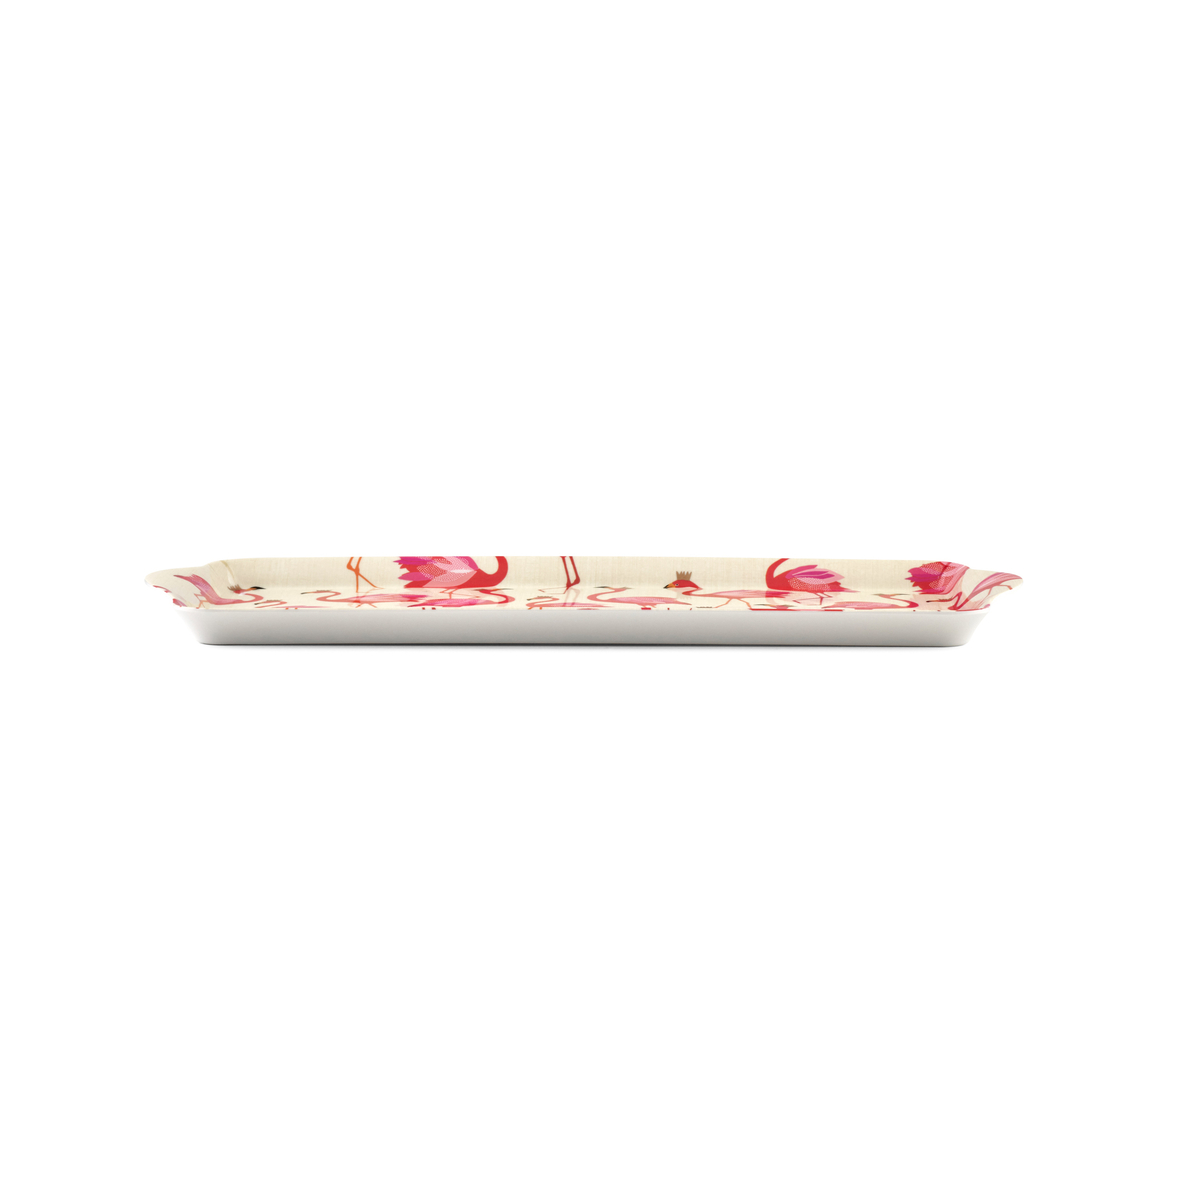 Sara Miller London The Flamingo Sandwich Tray image number null